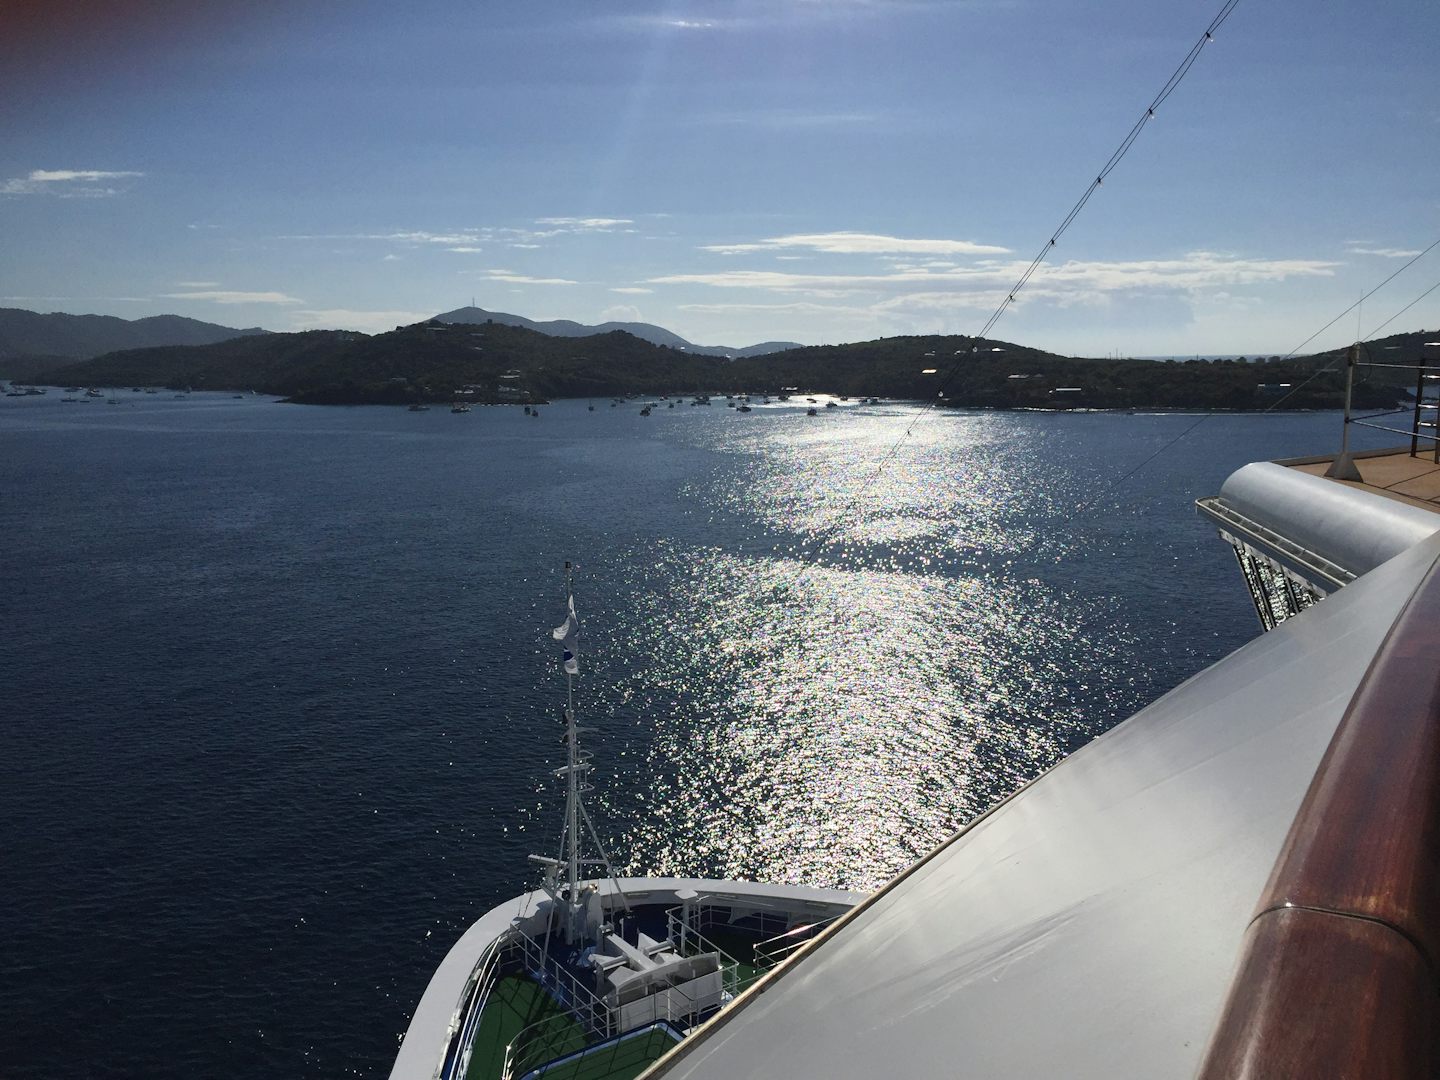 Arriving in St. Thomas, view from the balcony.